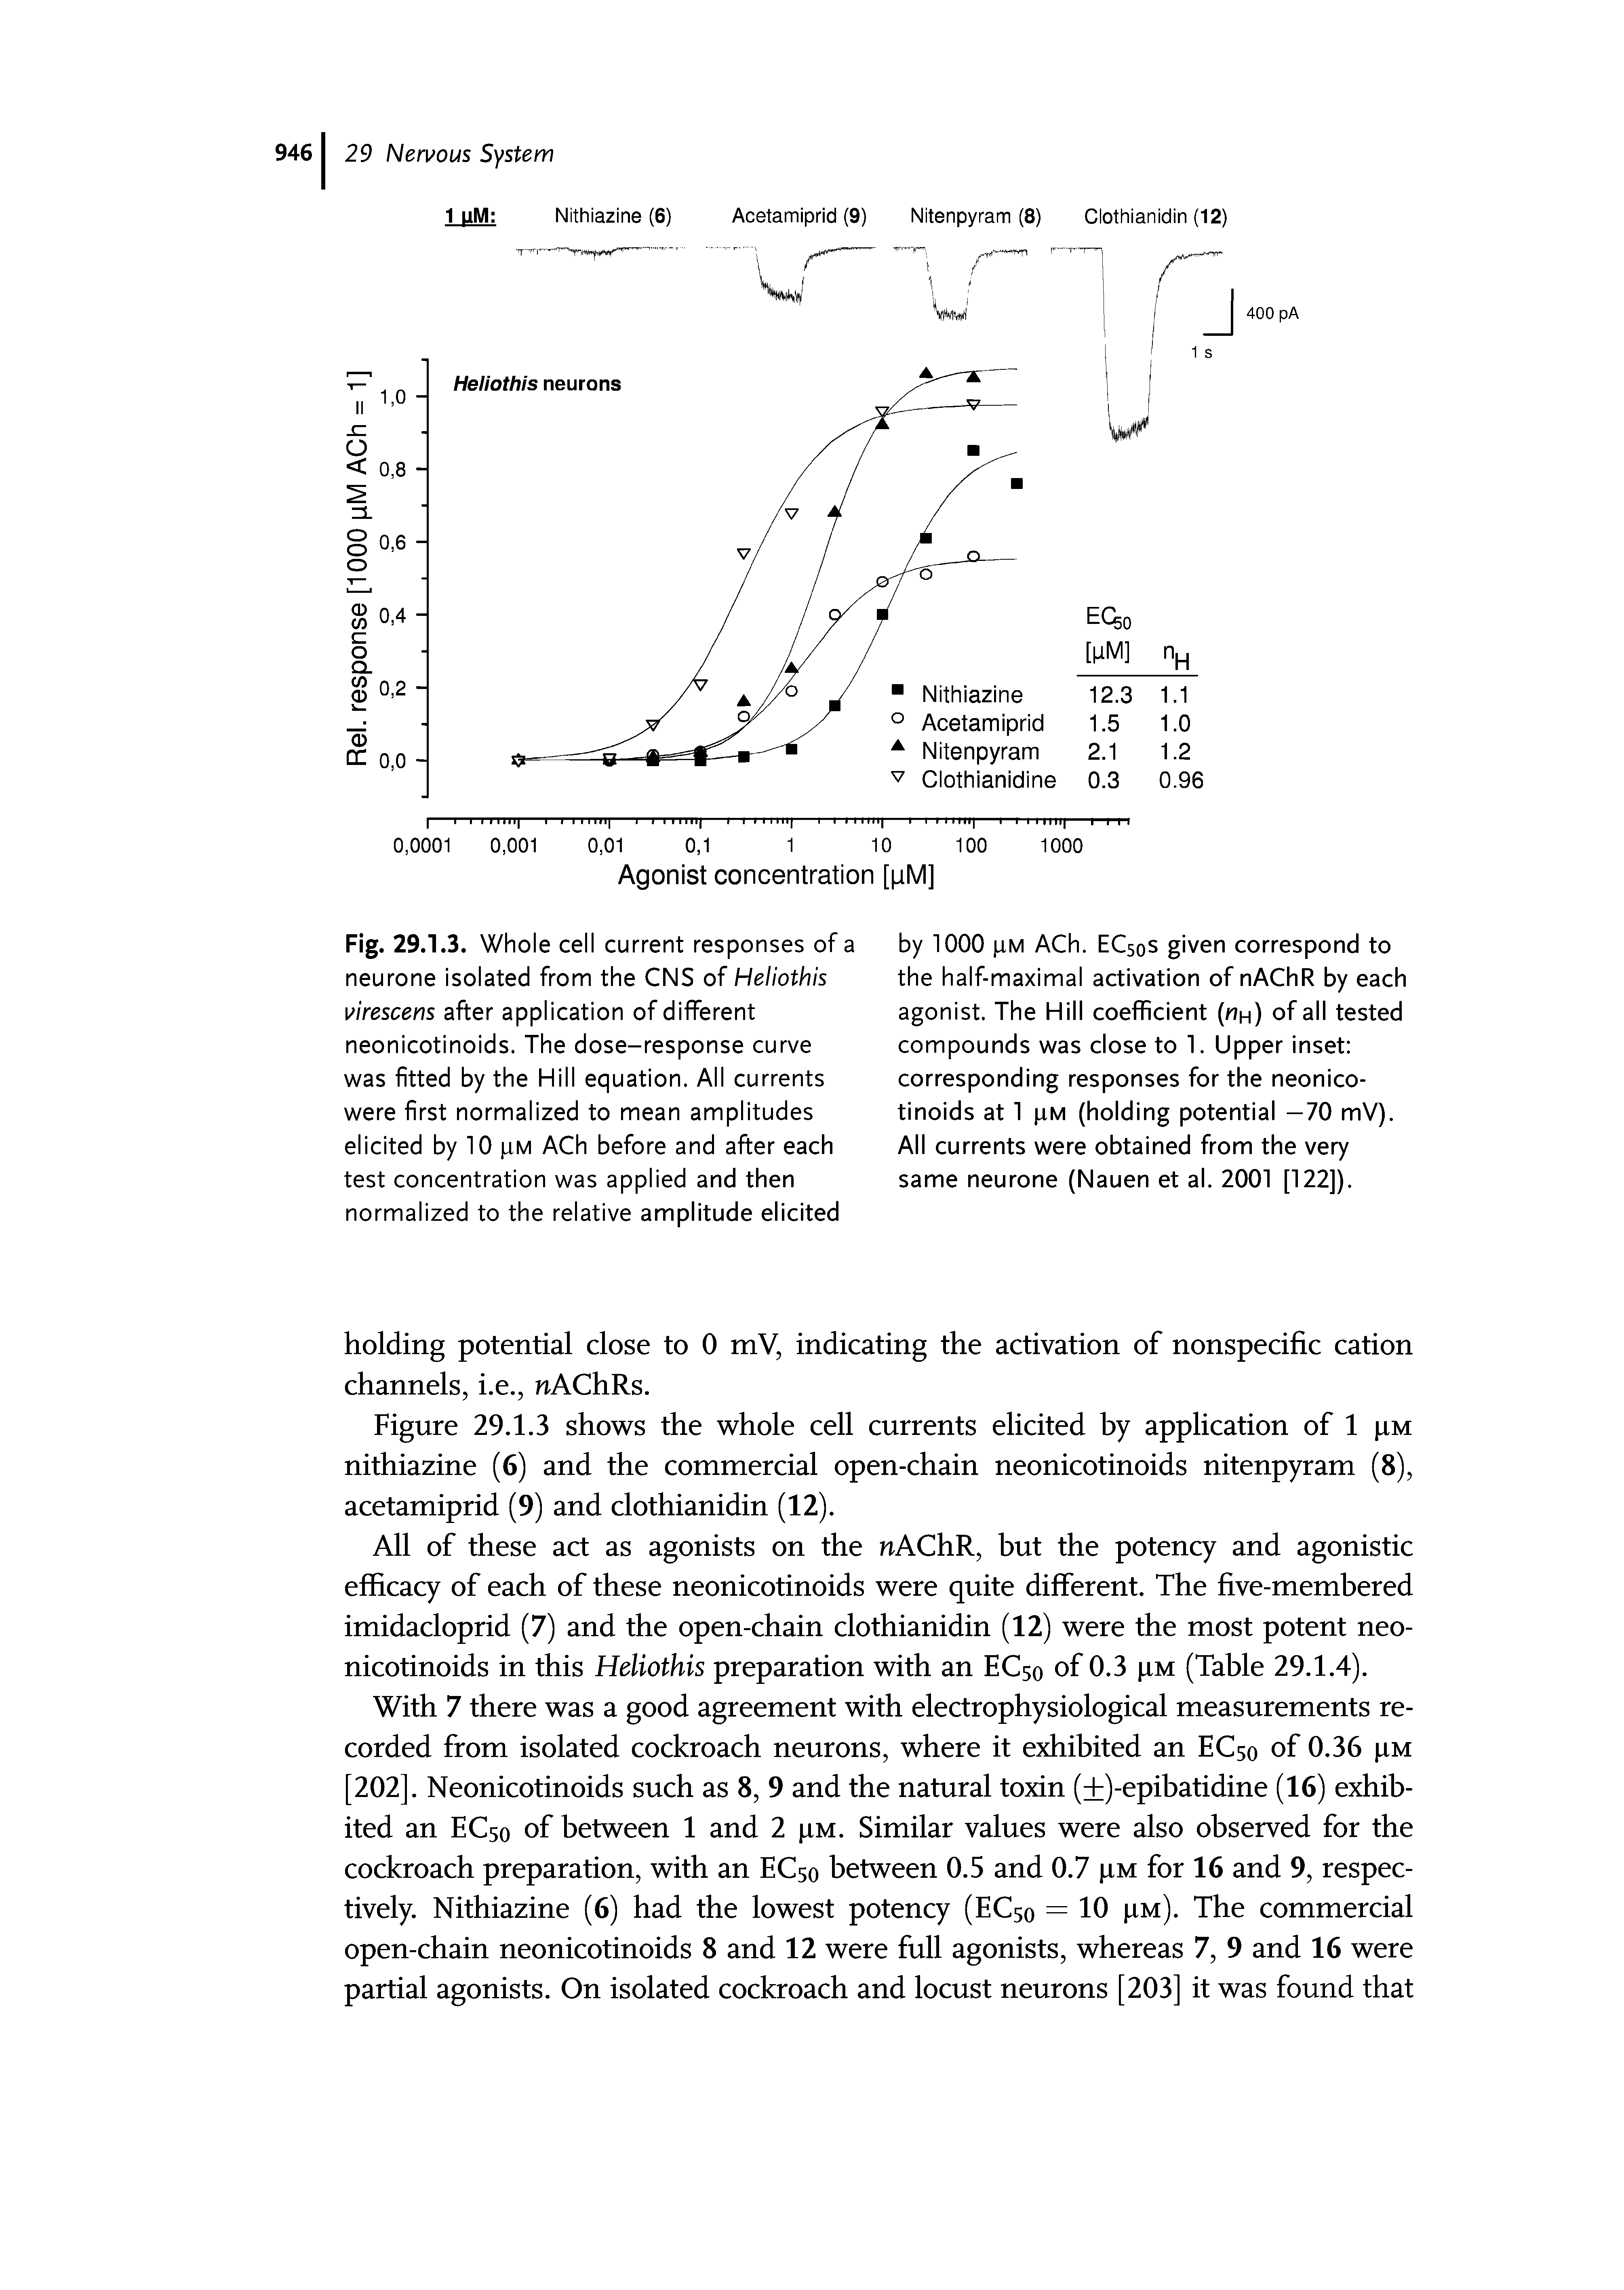 Fig. 29.1.3. Whole cell current responses of a neurone isolated from the CNS of Heliothis virescens after application of different neonicotinoids. The dose-response curve was fitted by the Hill equation. All currents were first normalized to mean amplitudes elicited b)/10 pM ACh before and after each test concentration was applied and then normalized to the relative amplitude elicited...